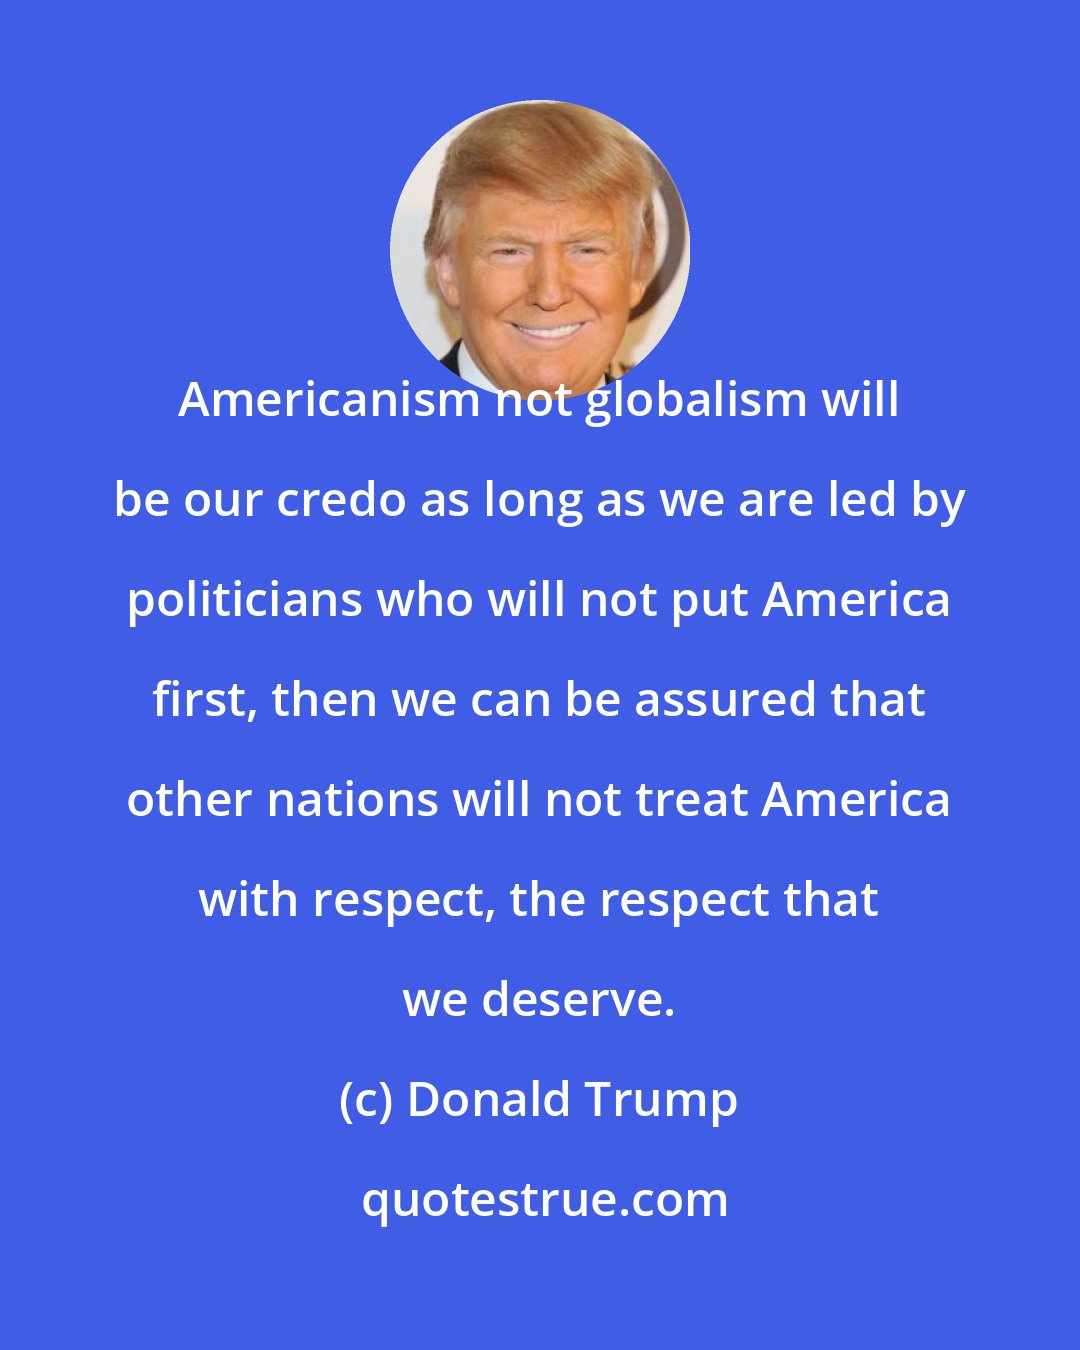 Donald Trump: Americanism not globalism will be our credo as long as we are led by politicians who will not put America first, then we can be assured that other nations will not treat America with respect, the respect that we deserve.